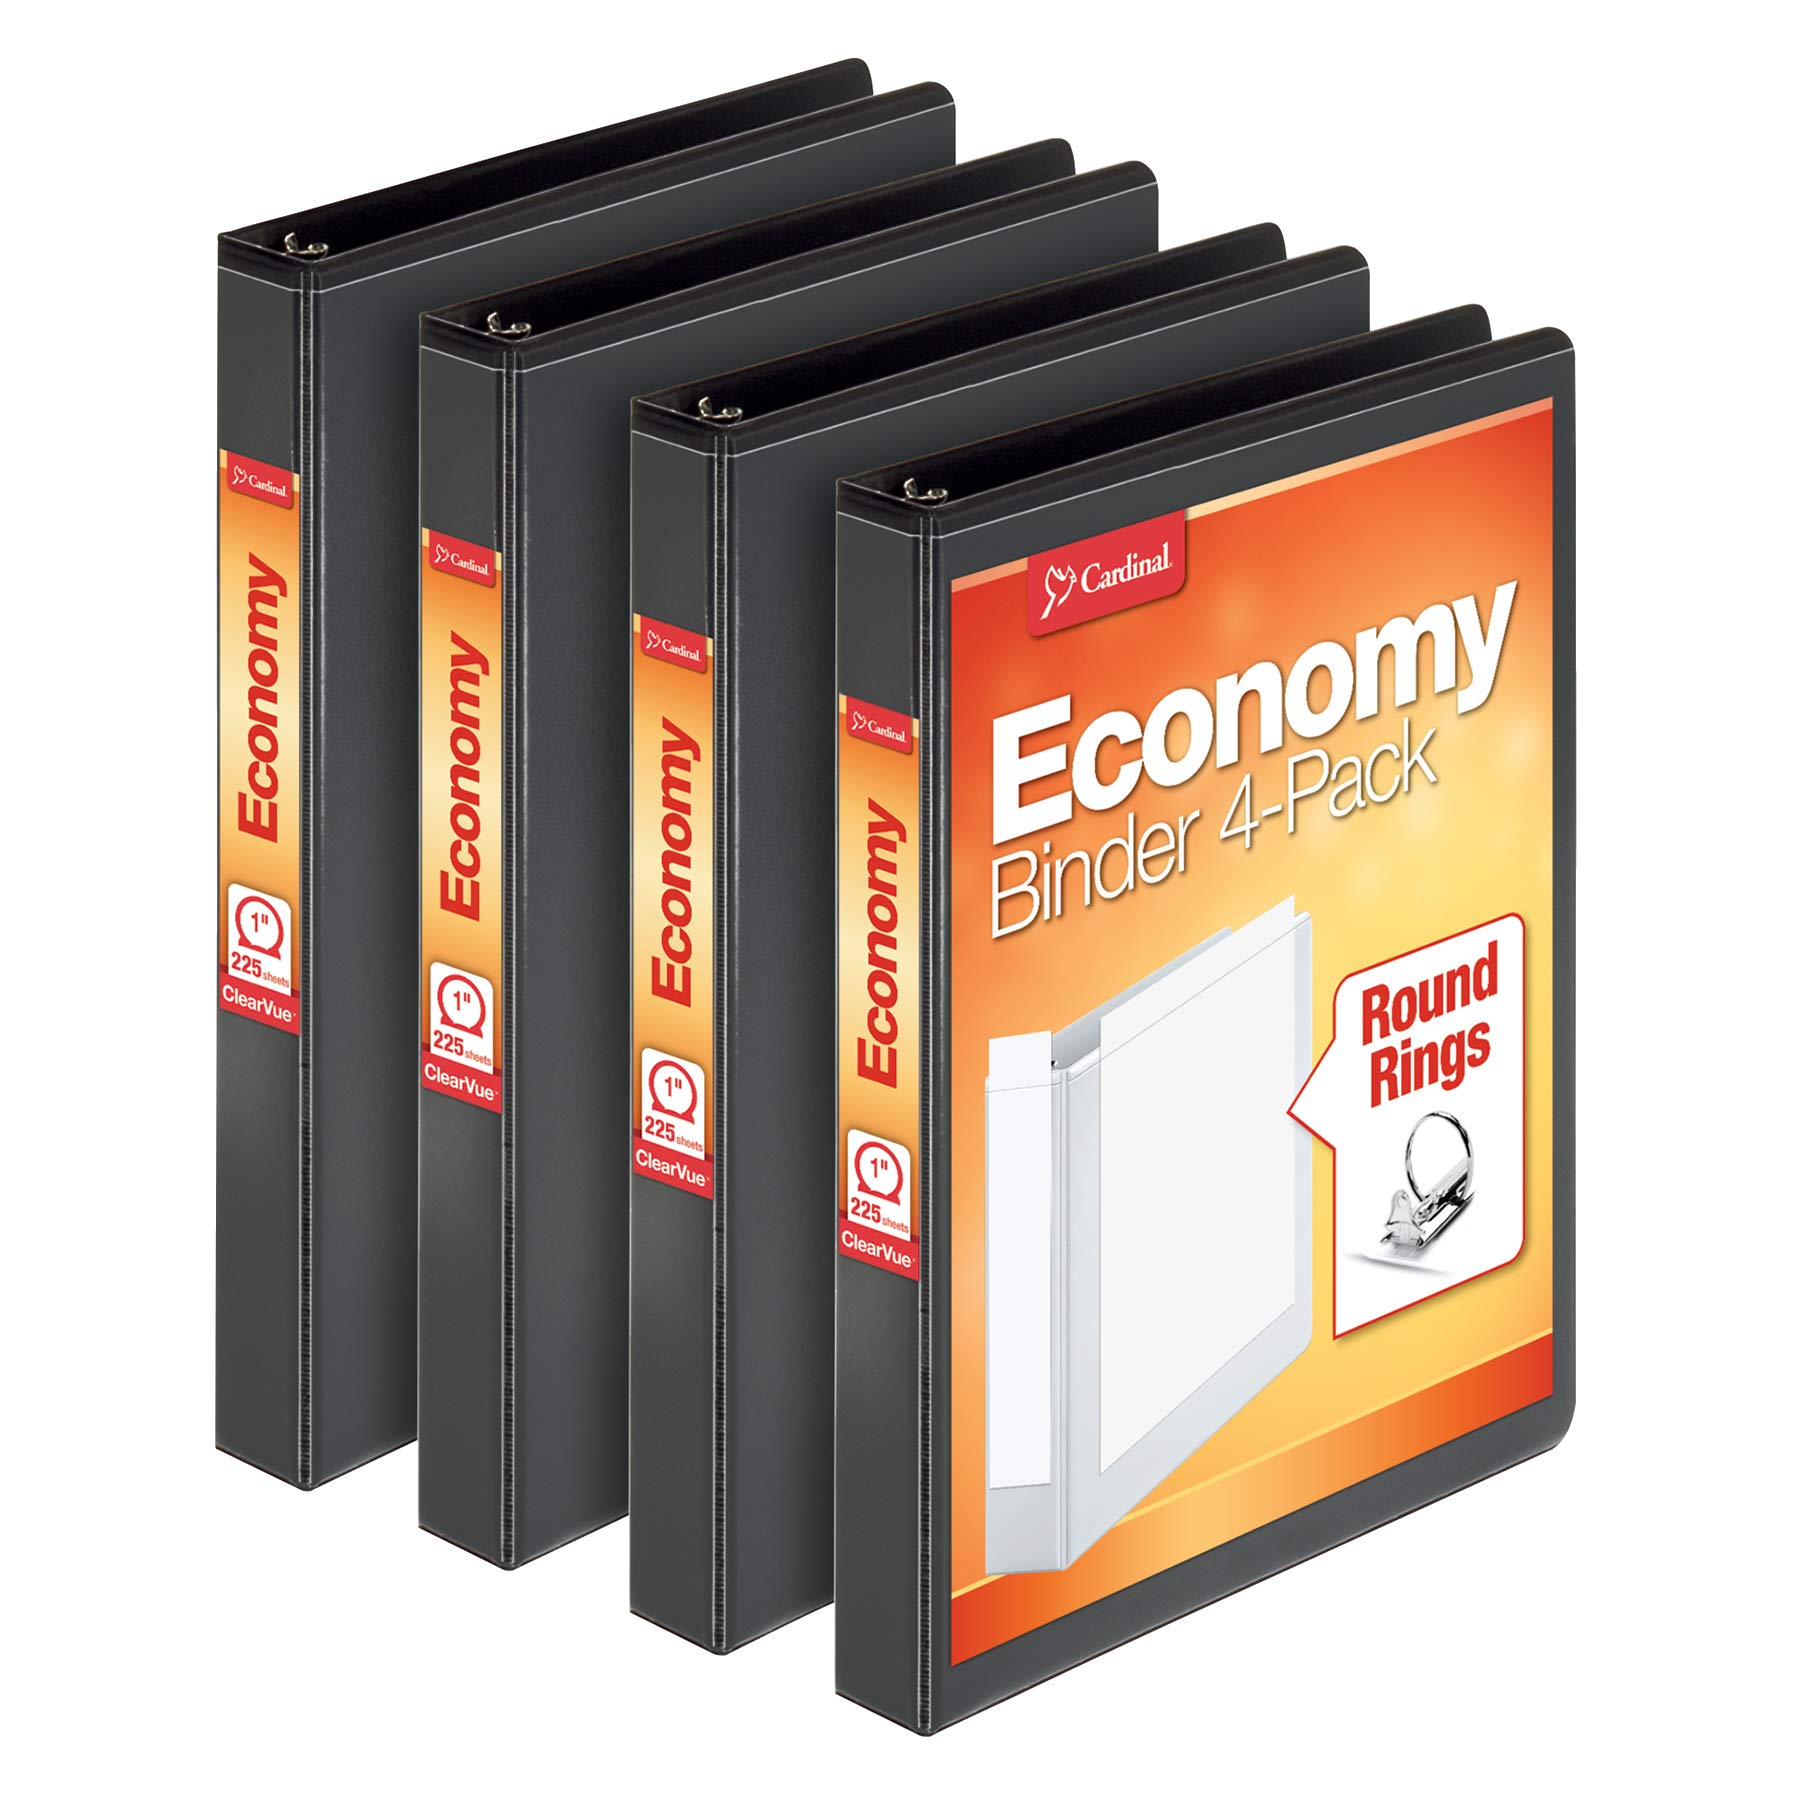 Book Cover Cardinal Economy 3 Ring Binder, 1 Inch, Presentation View, Black, Holds 225 Sheets, Nonstick, PVC Free, 4 Pack of Binders (79512) 1-Inch Black Storage Binder